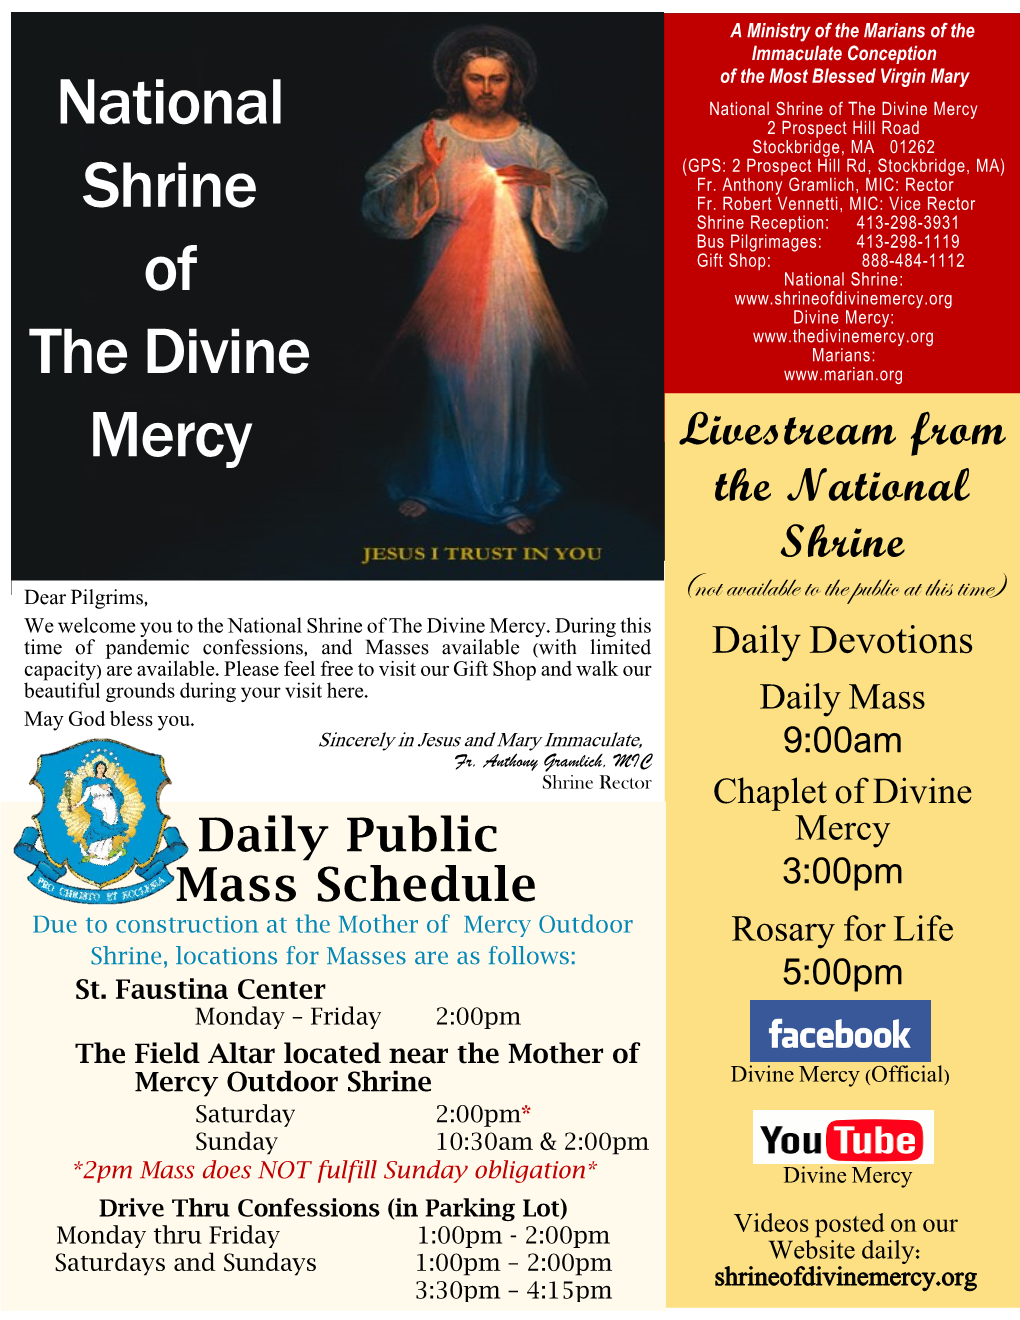 The National Shrine of the Divine Mercy